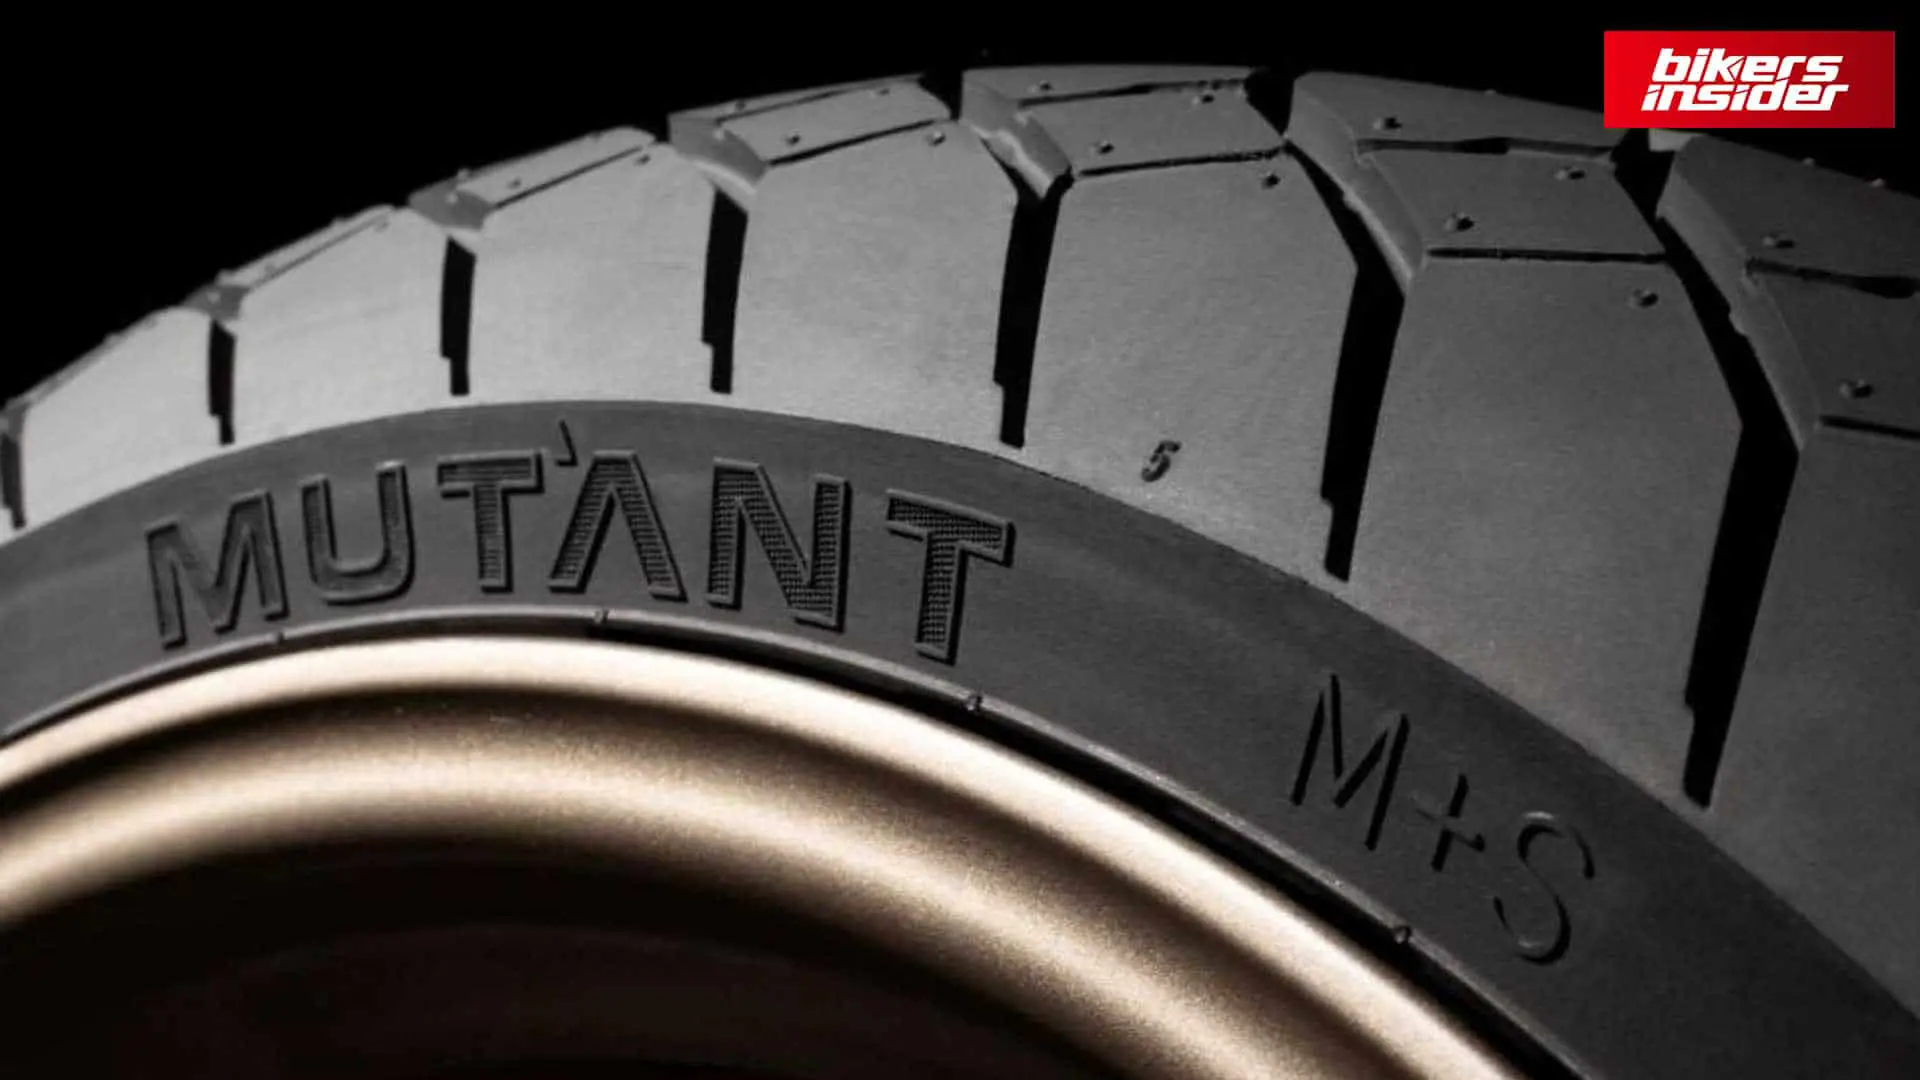 Dunlop Launches the Mutant - the All-Season Tires For 2020!